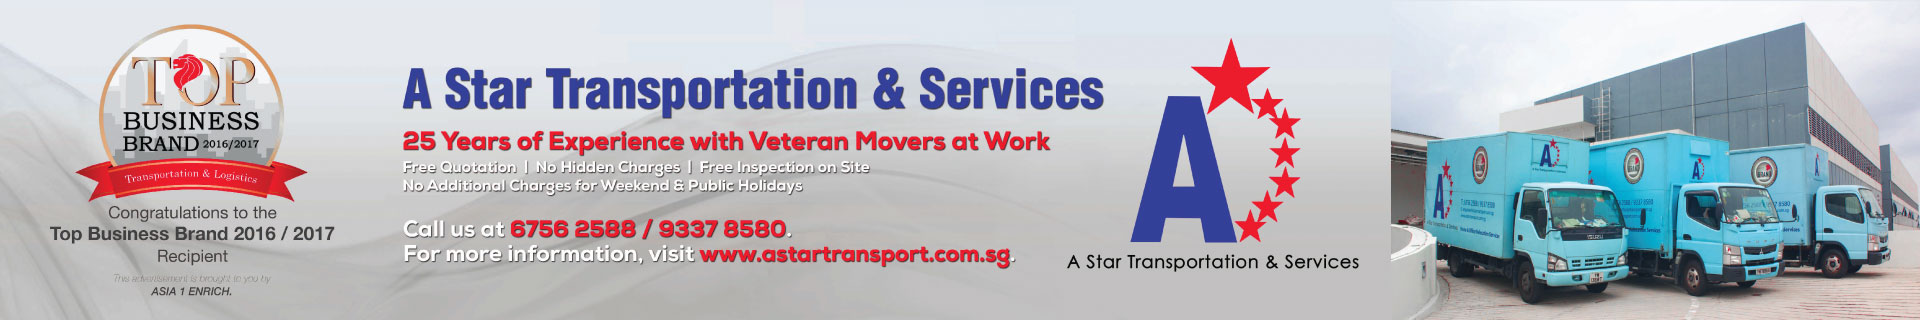 Professional moving company in Singapore